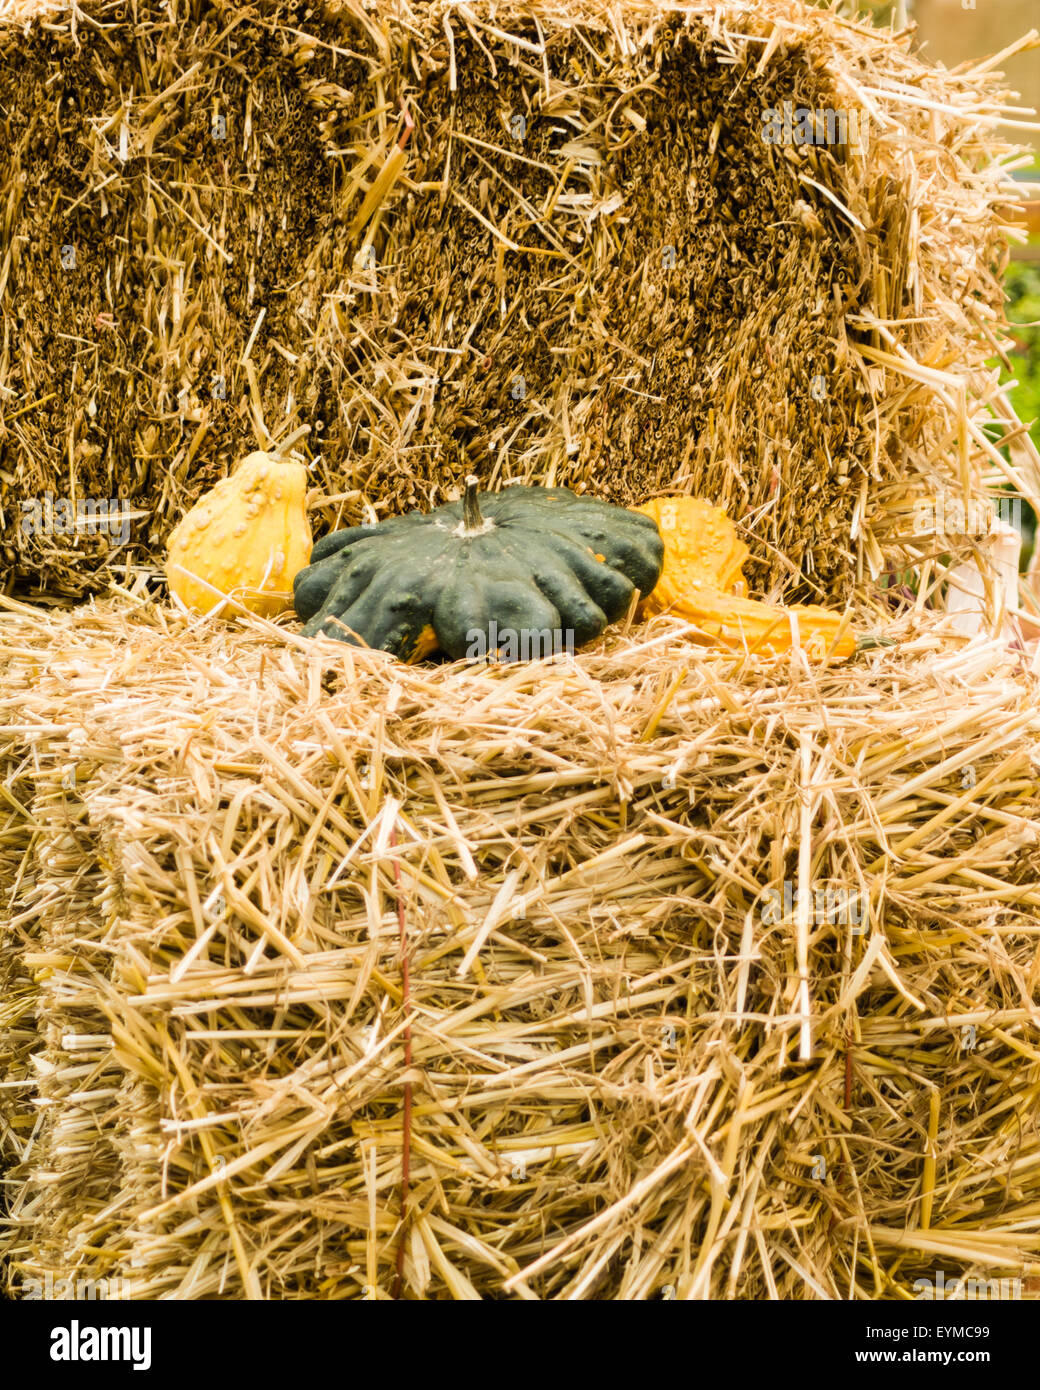 Display of hay bales with gourds Stock Photo